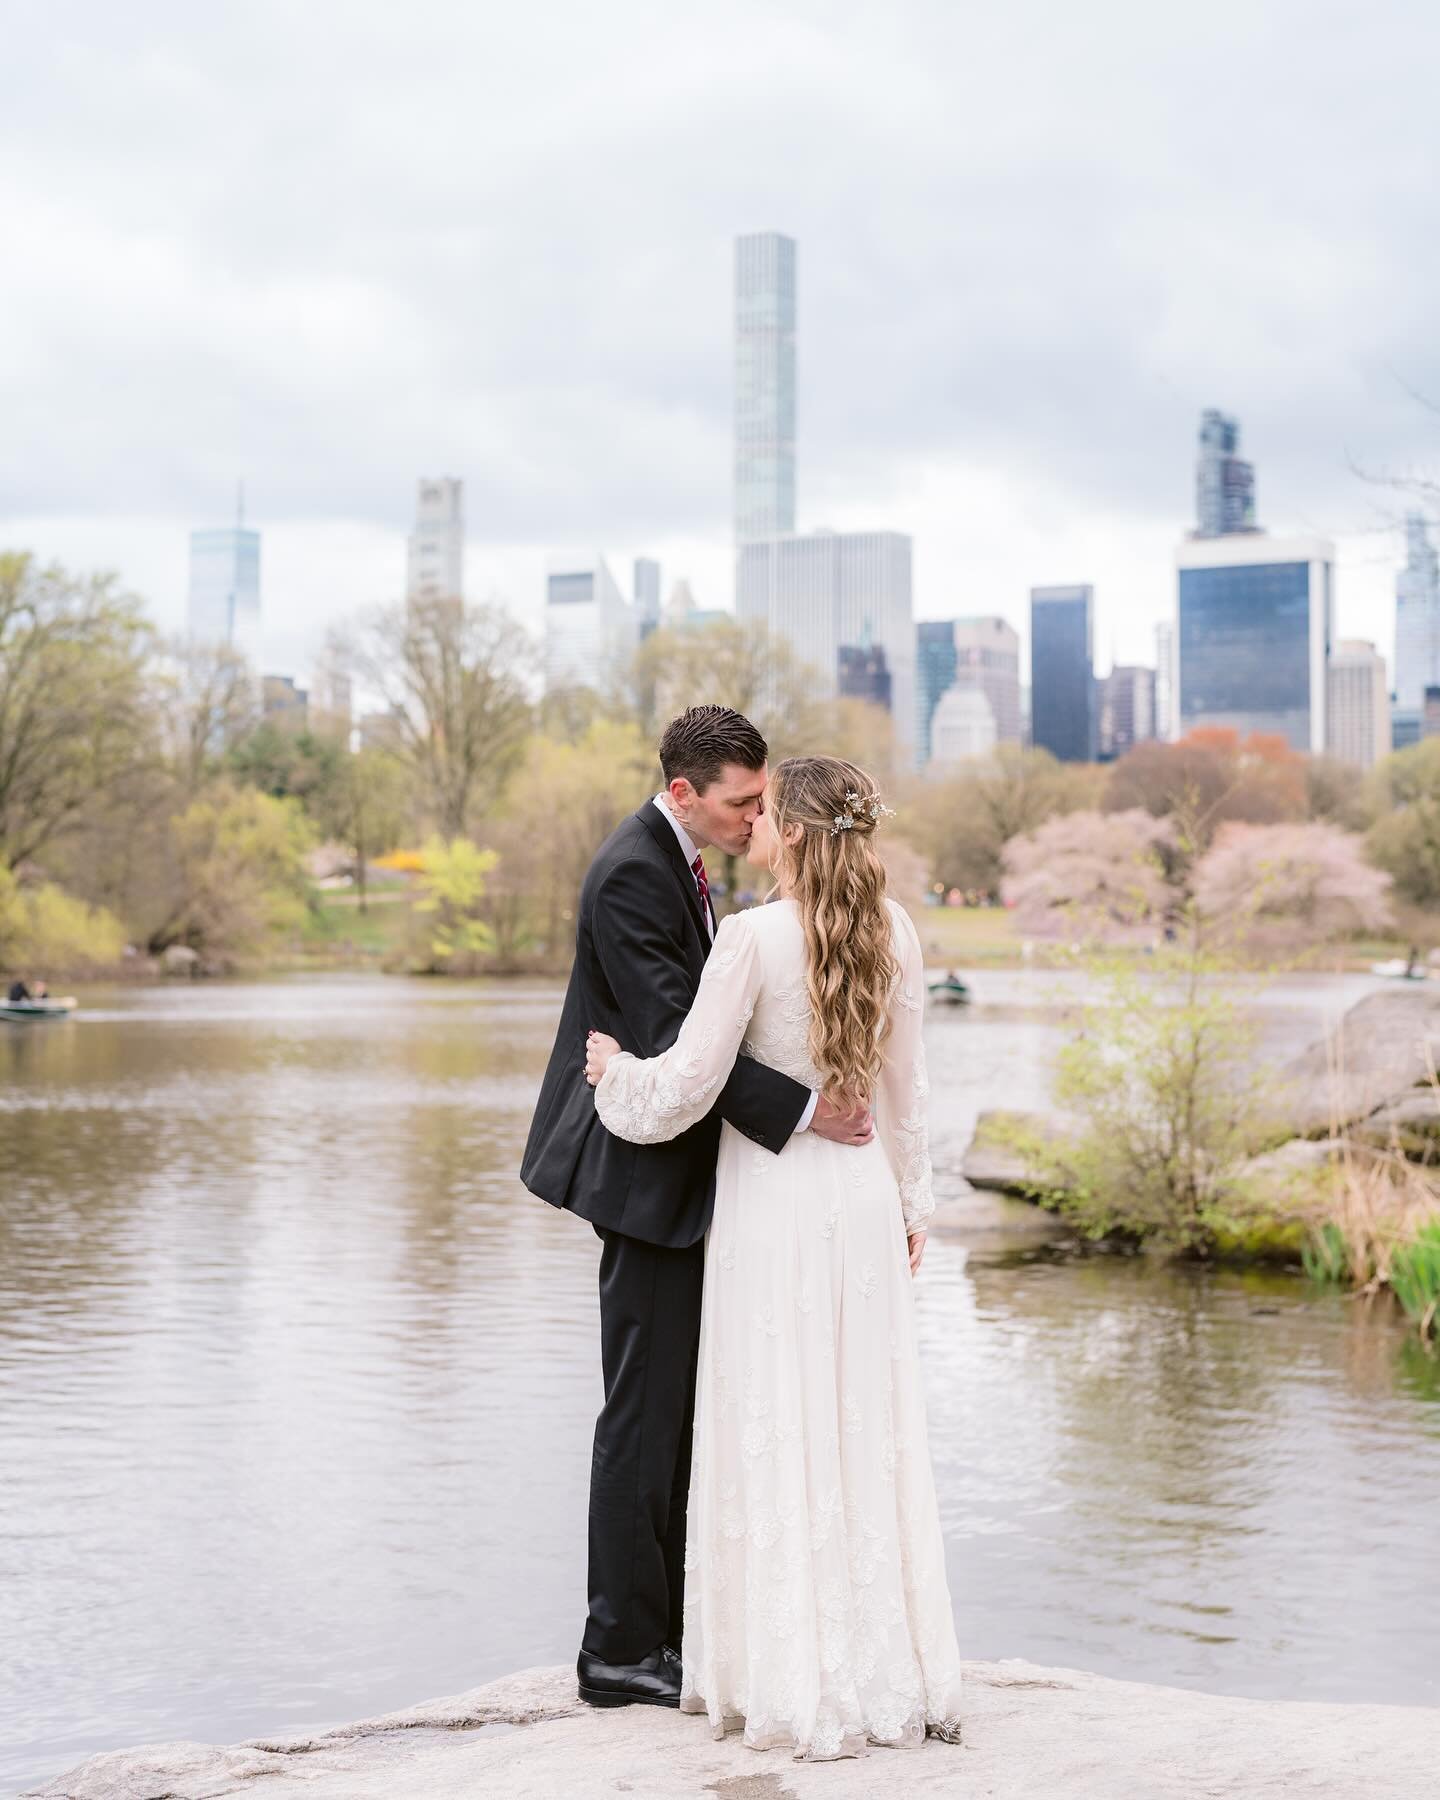 Love story in Central Park&hellip; Which of these famous films with scenes in the iconic park have you seen?
🌳 
It Could Happen to You, 1954
Breakfast at Tiffany&rsquo;s, 1961
Manhattan (Woody Allen), 1979
When Harry Met Sally, 1989
Serendipity, 200